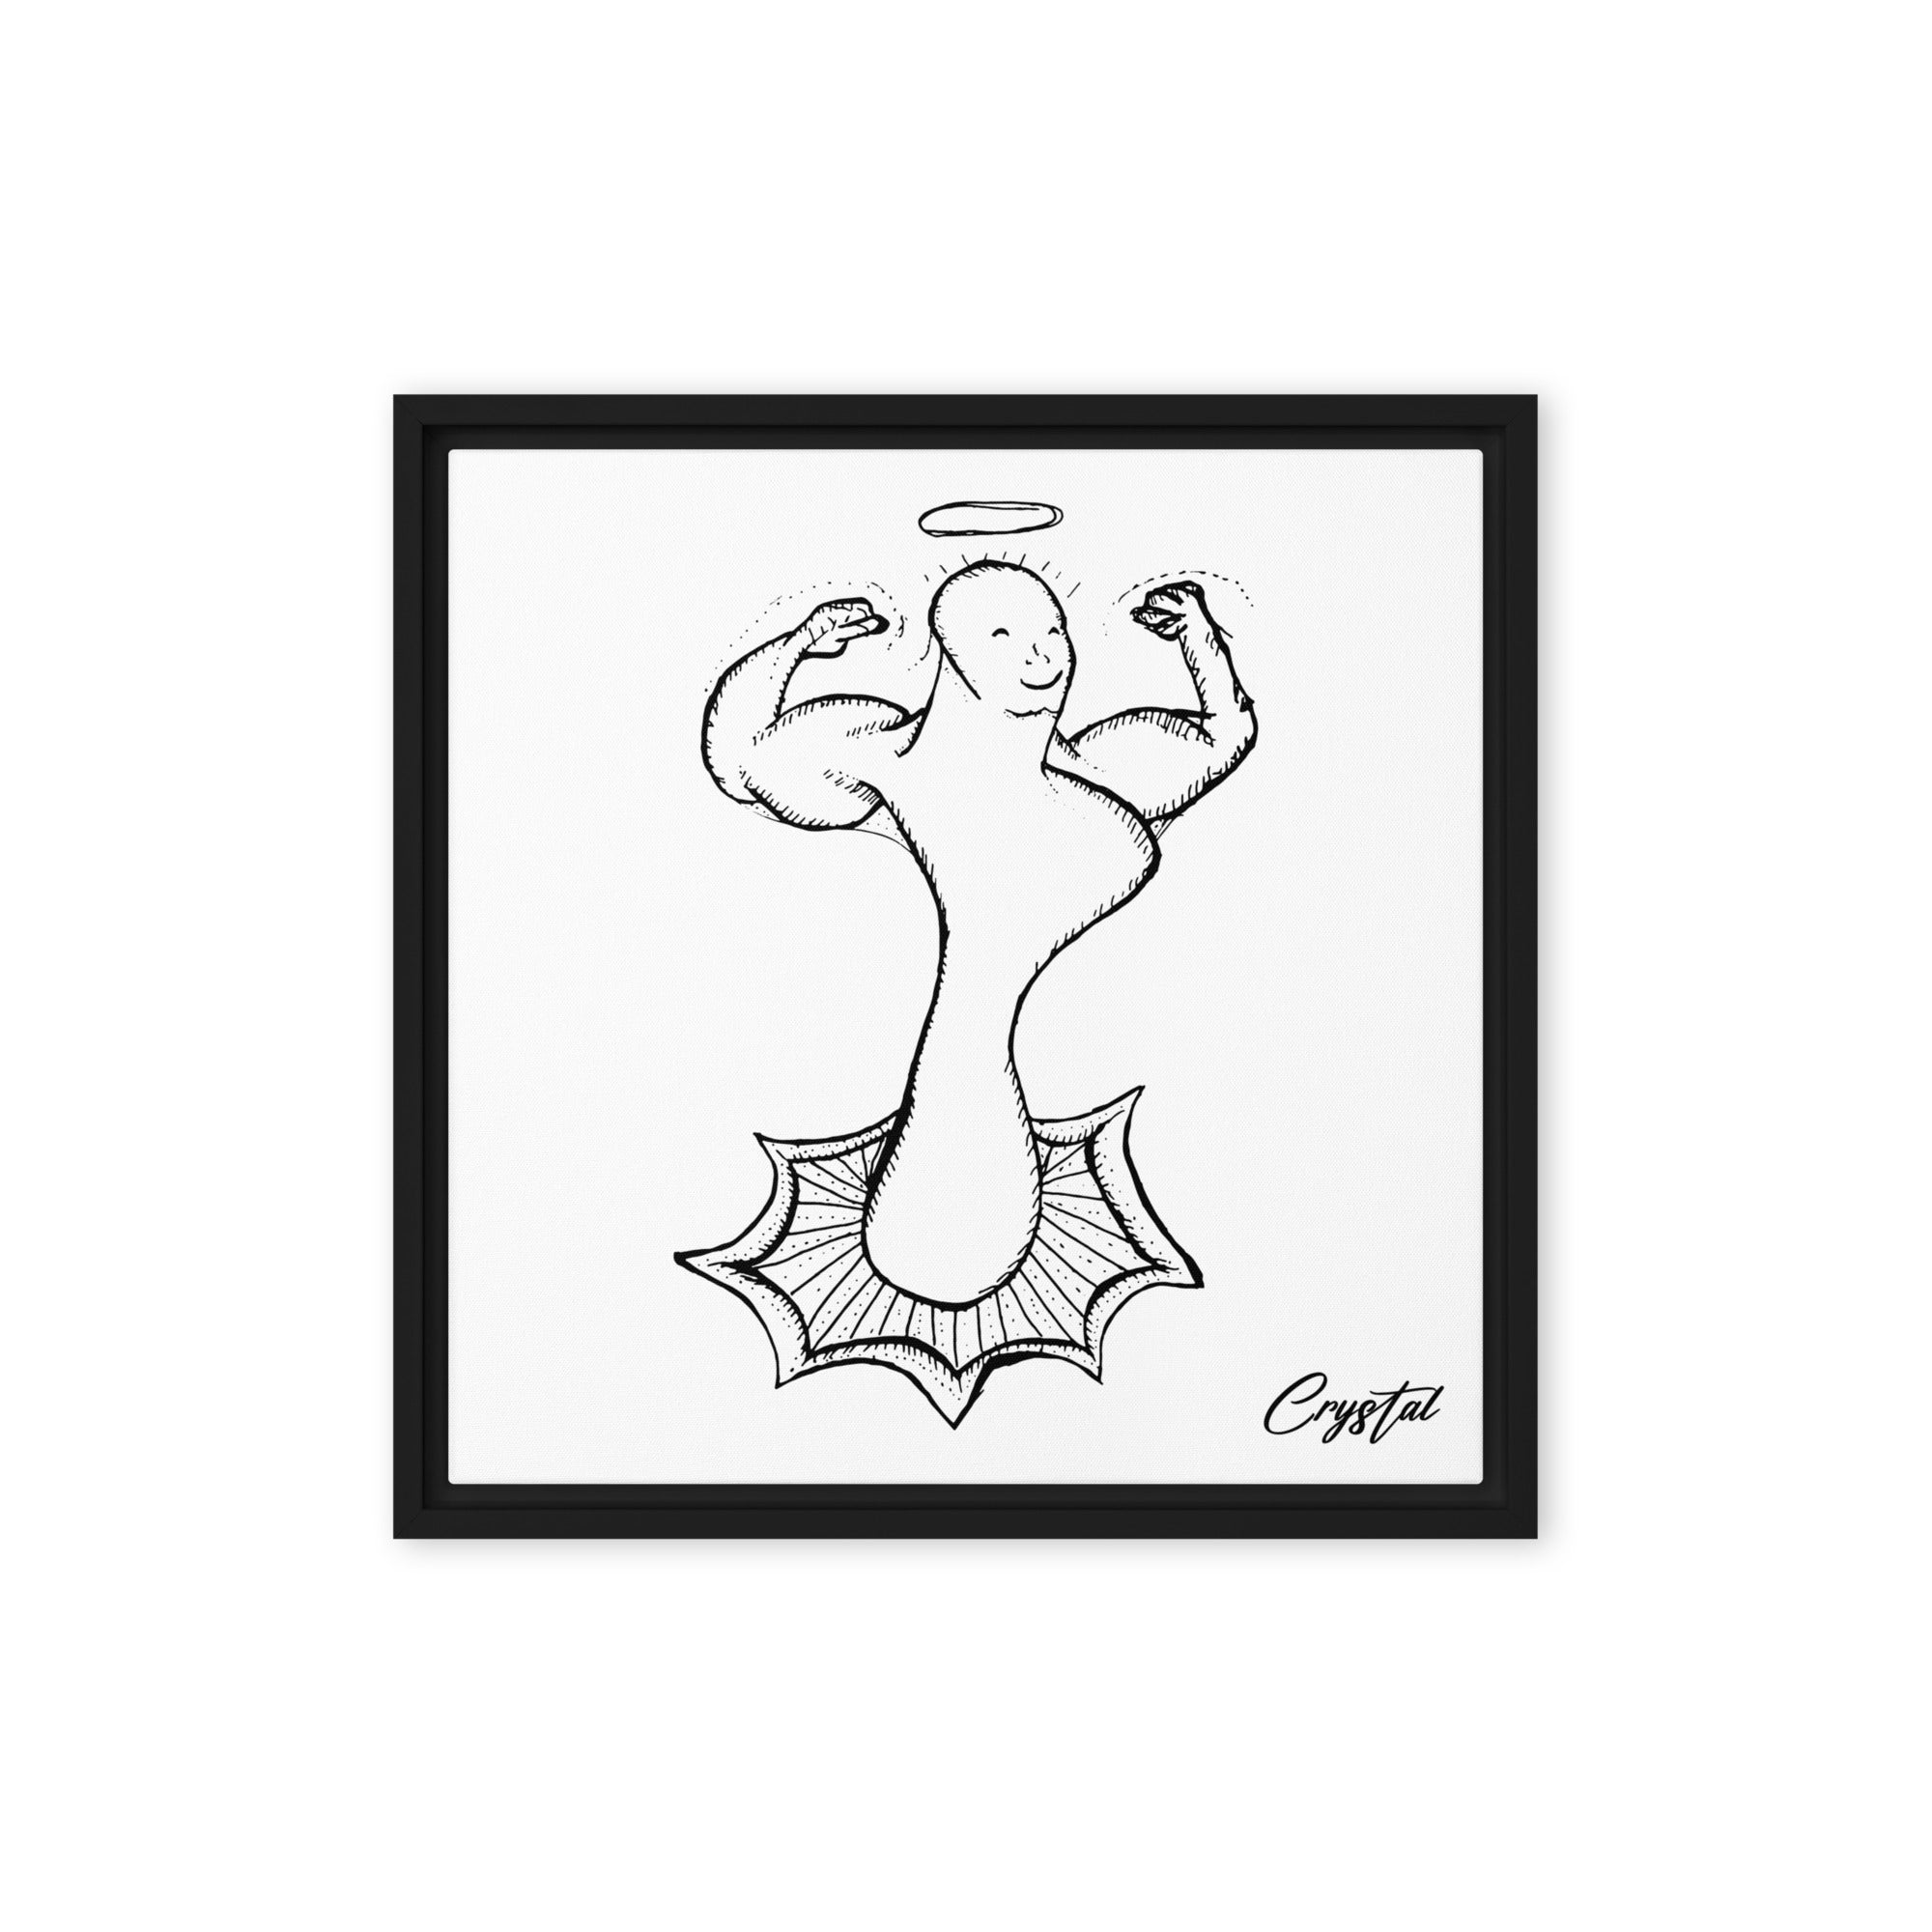 Abstract Drawing of Genderless Powerful Man or Woman Flexing Biceps With A Proud Chest - Cute & Creepy "Stay Weird" Cartoon Illustration Framed canvas